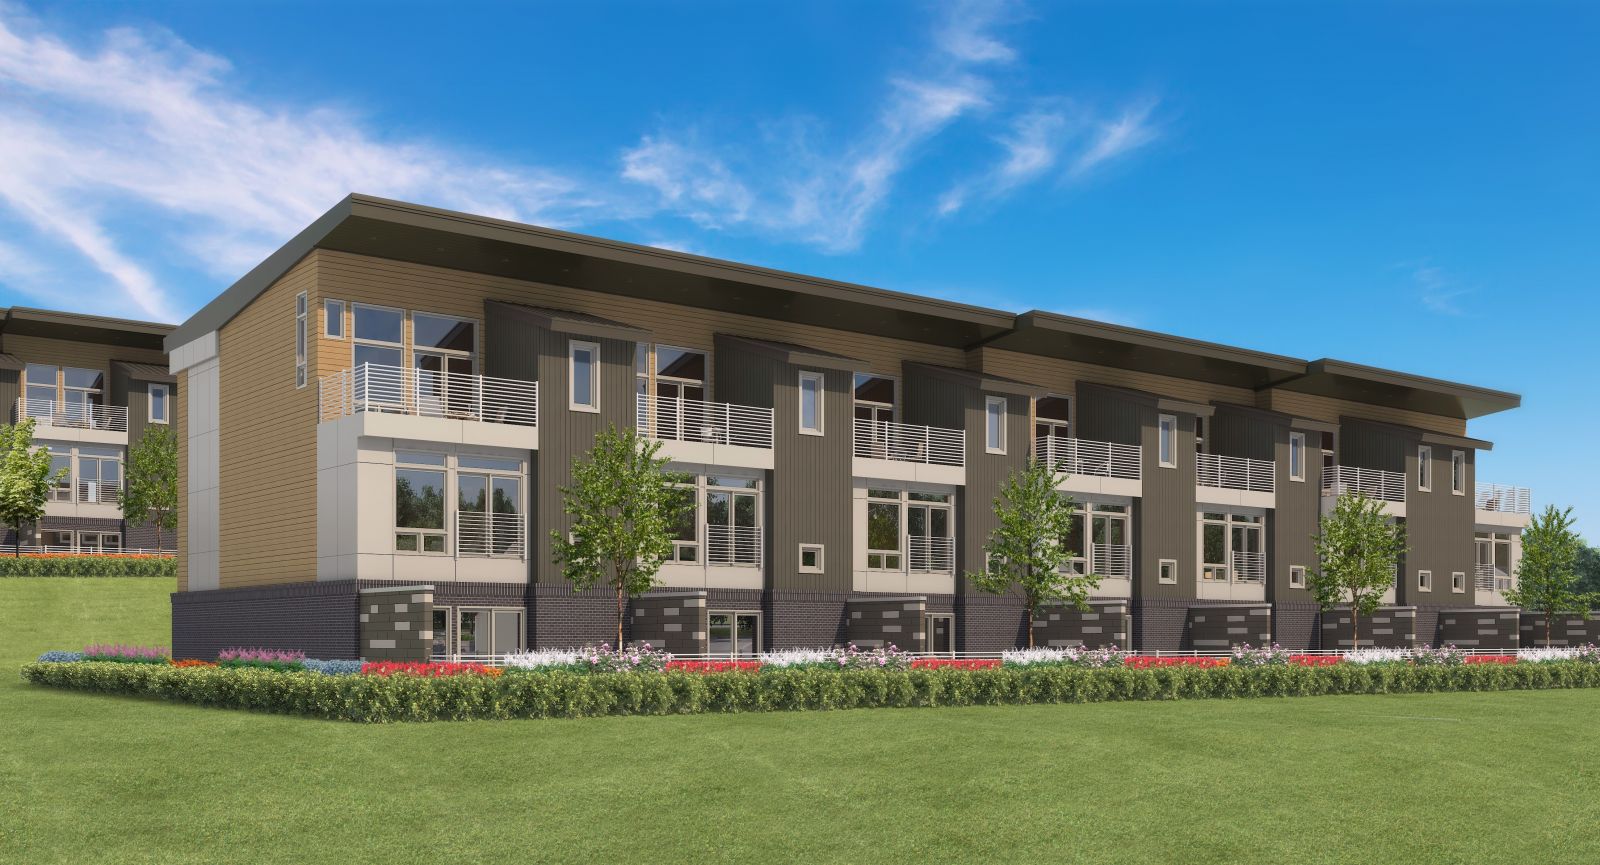 Site preparation is underway on Flow 2, which features 12 three-bedroom townhomes overlooking the Congaree River. (Rendering/Provided)